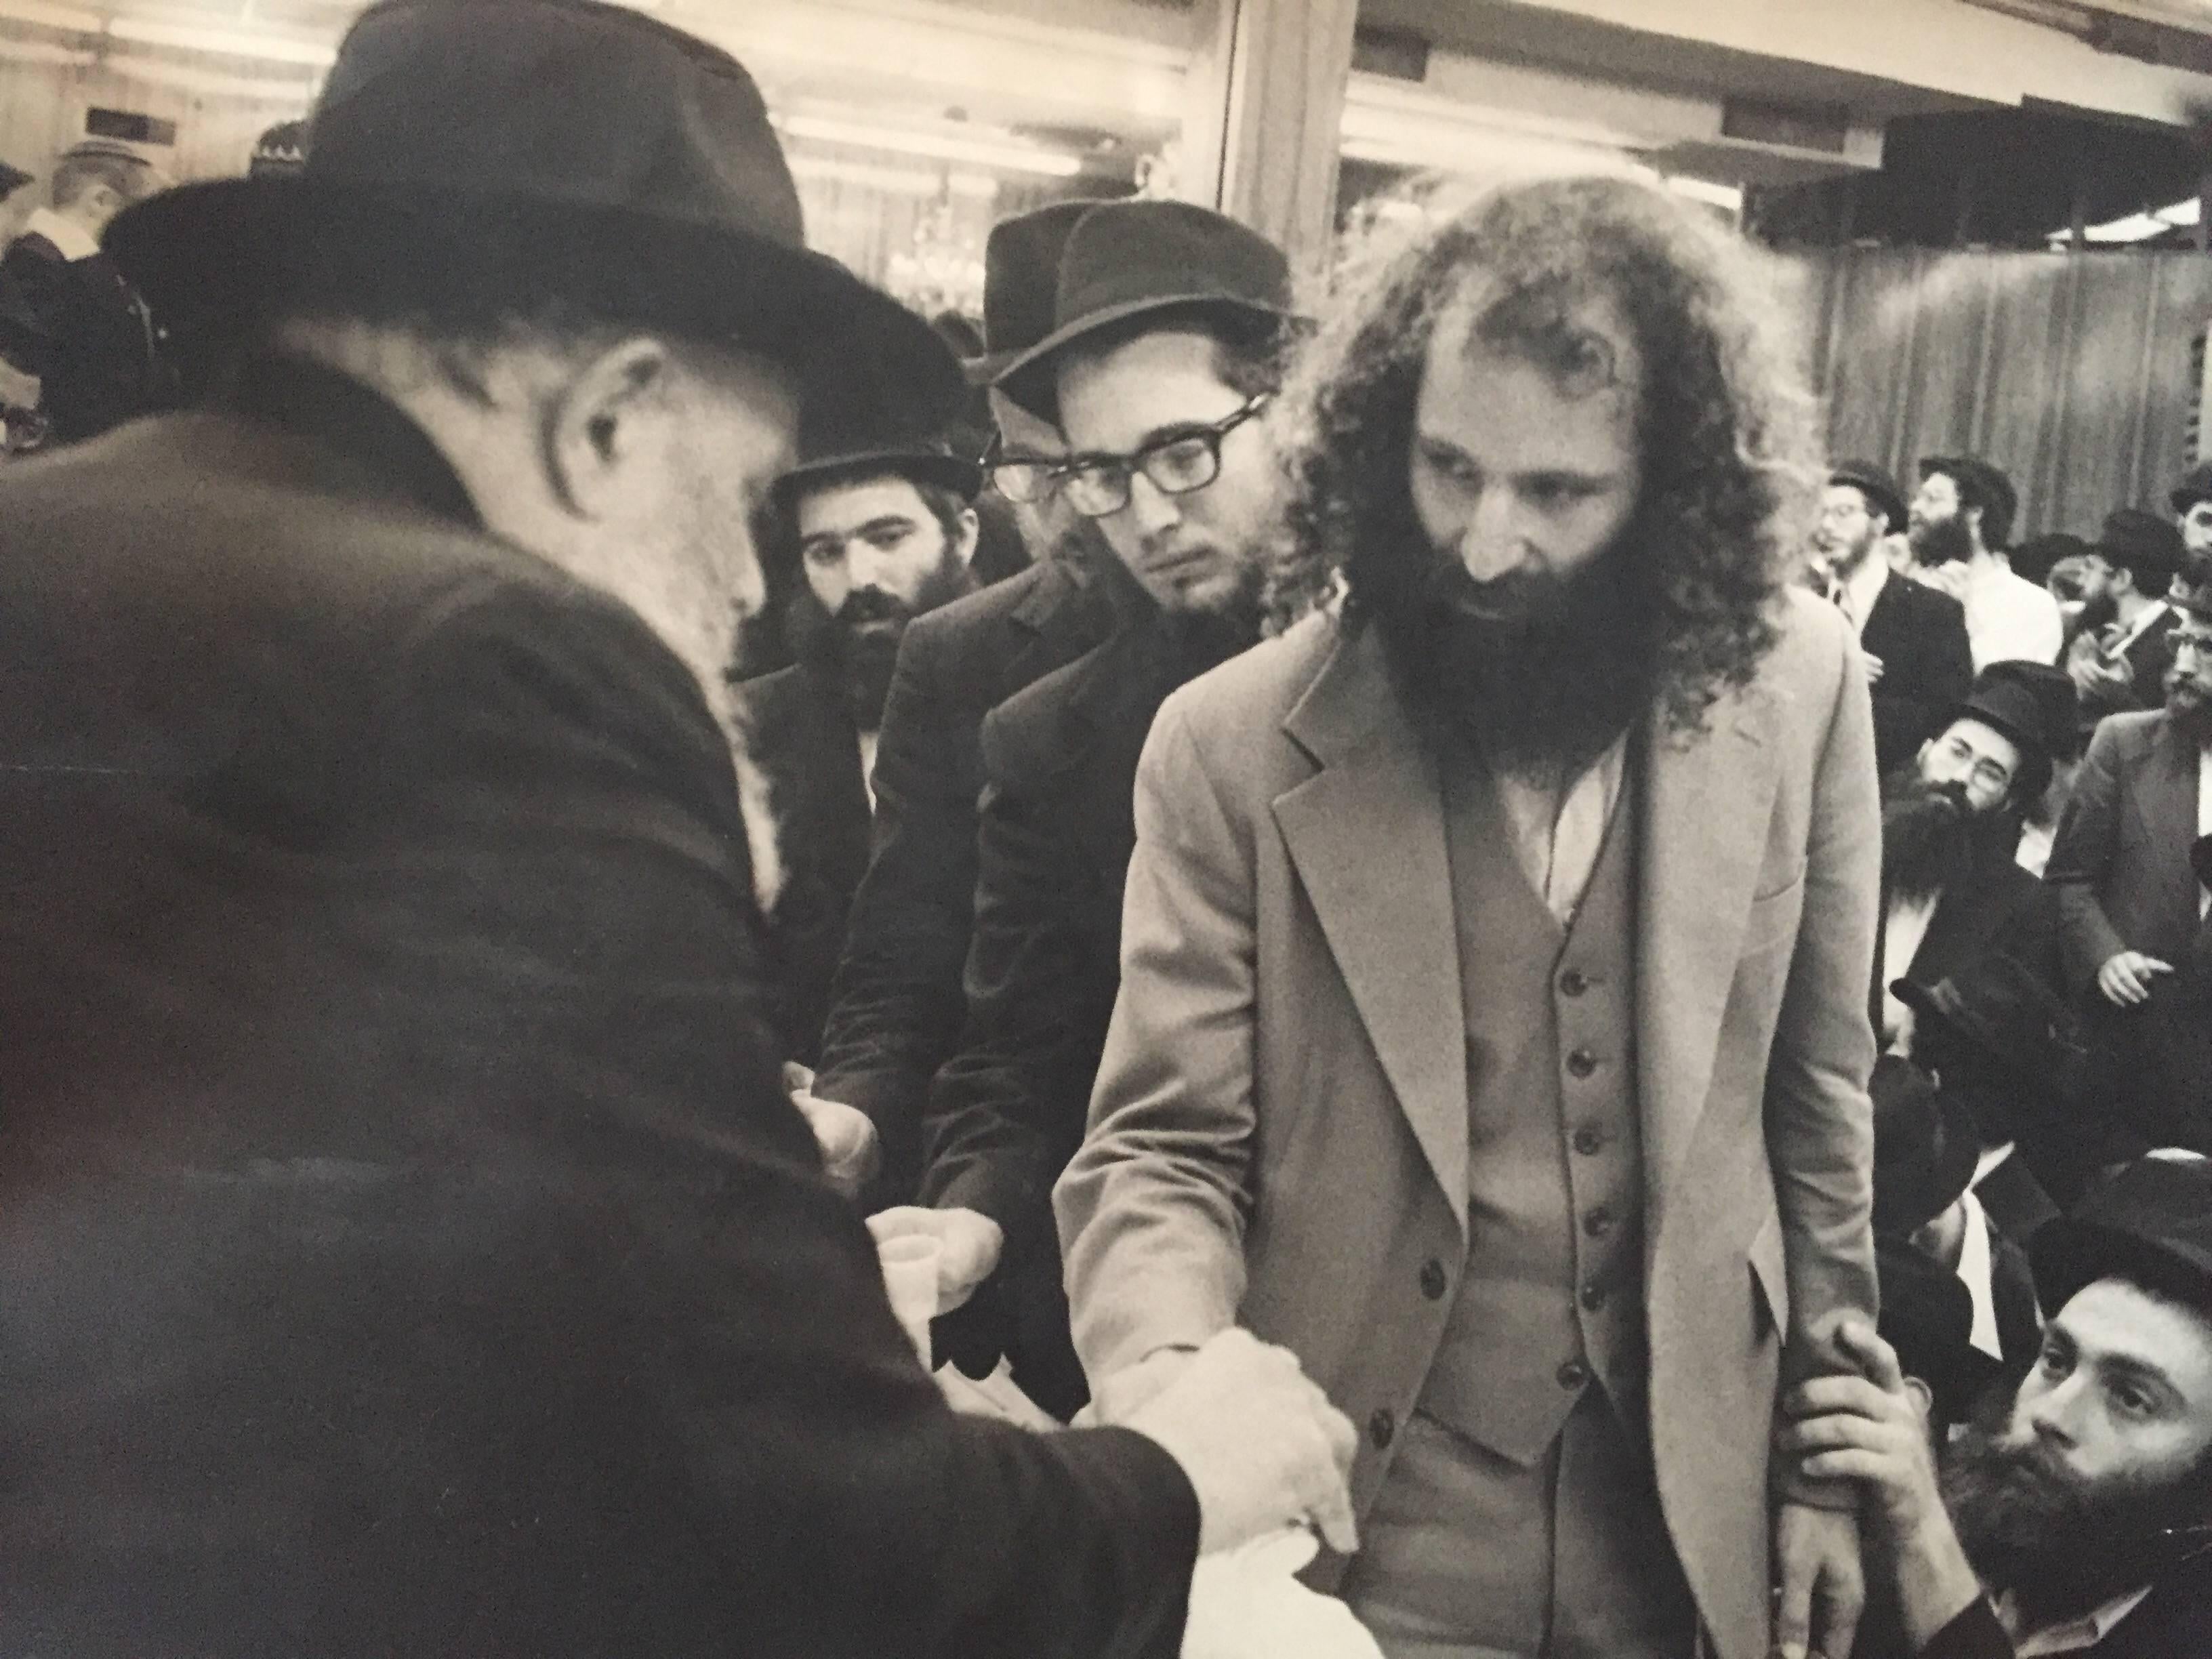 Rare Vintage Original Photo from the Court of The Lubavitcher Rebbe at 770